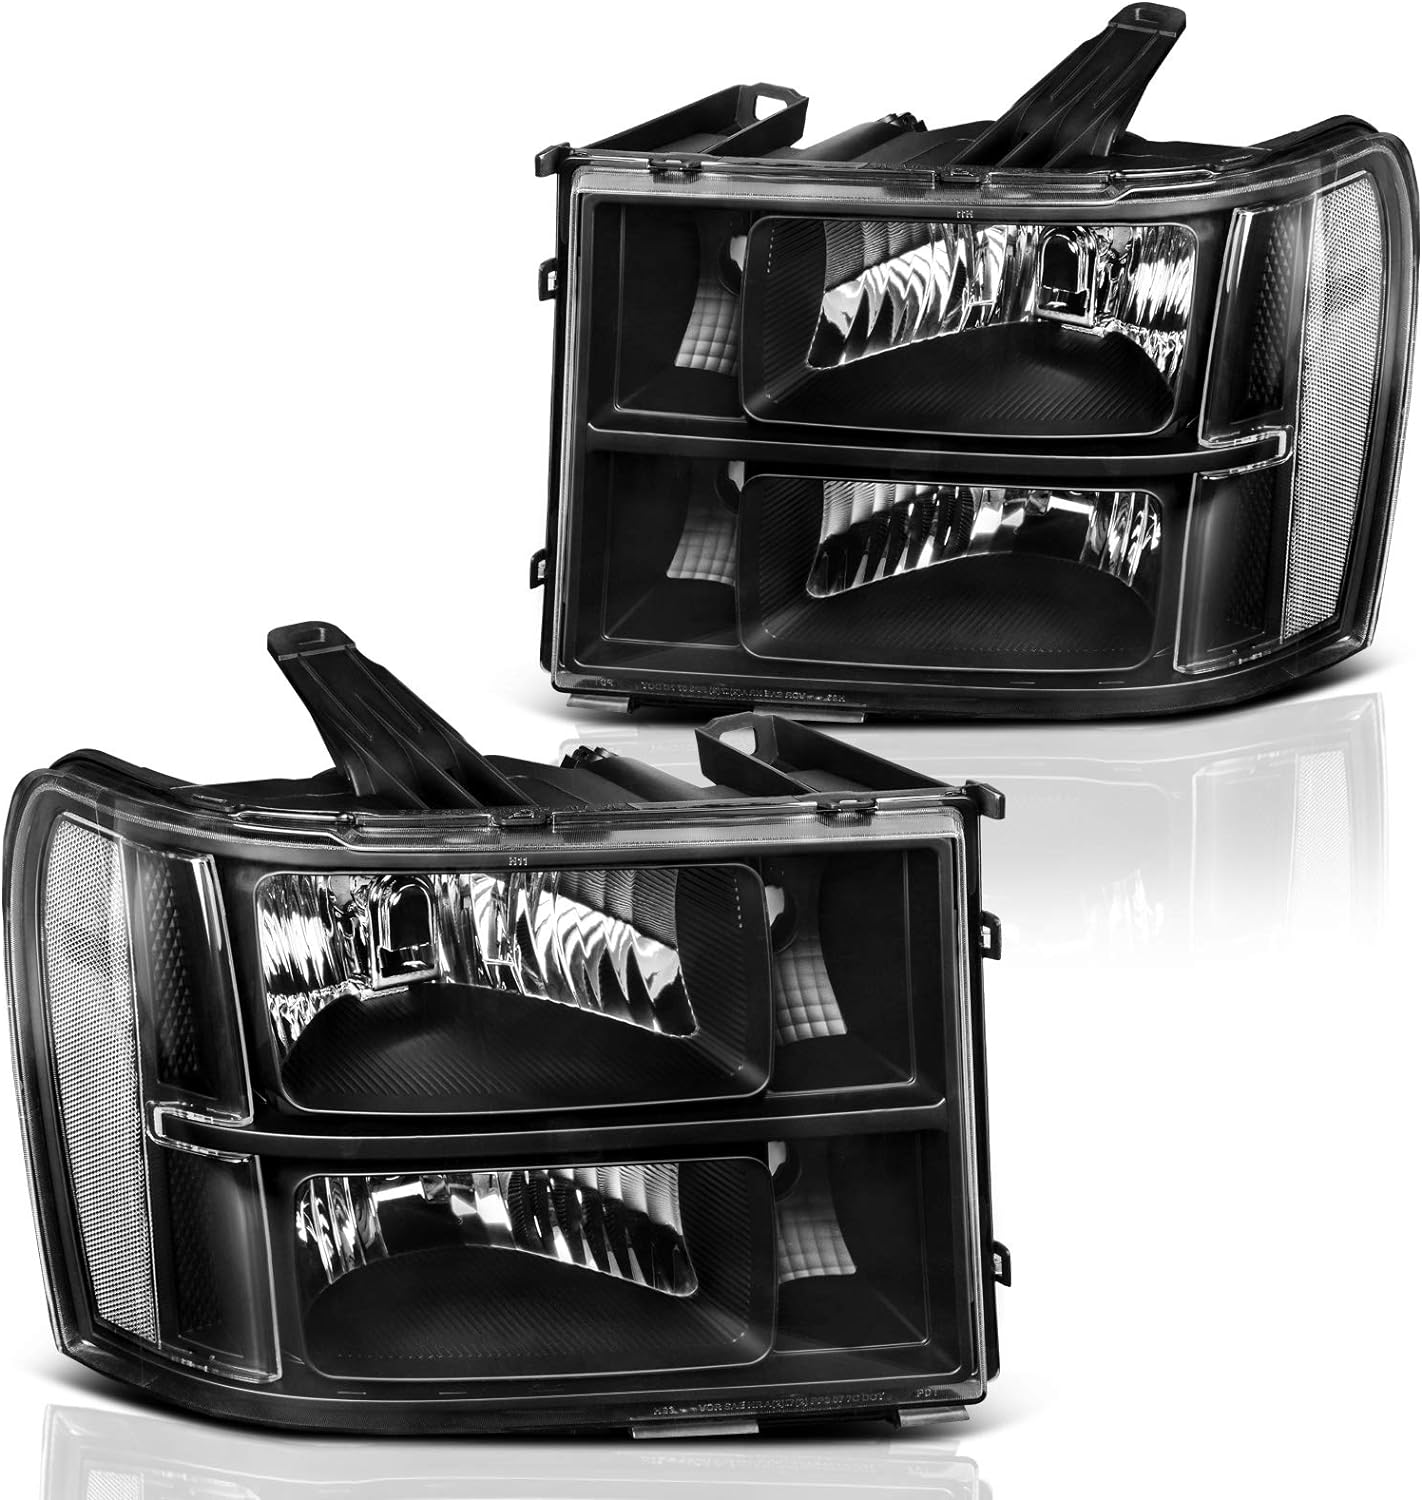 DWVO Headlights Assembly Compatible with 2007-2013 GMC Sierra 1500/2007-2014 Sierra 2500HD 3500HD Black Housing Clear Reflector Passenger and Driver Side